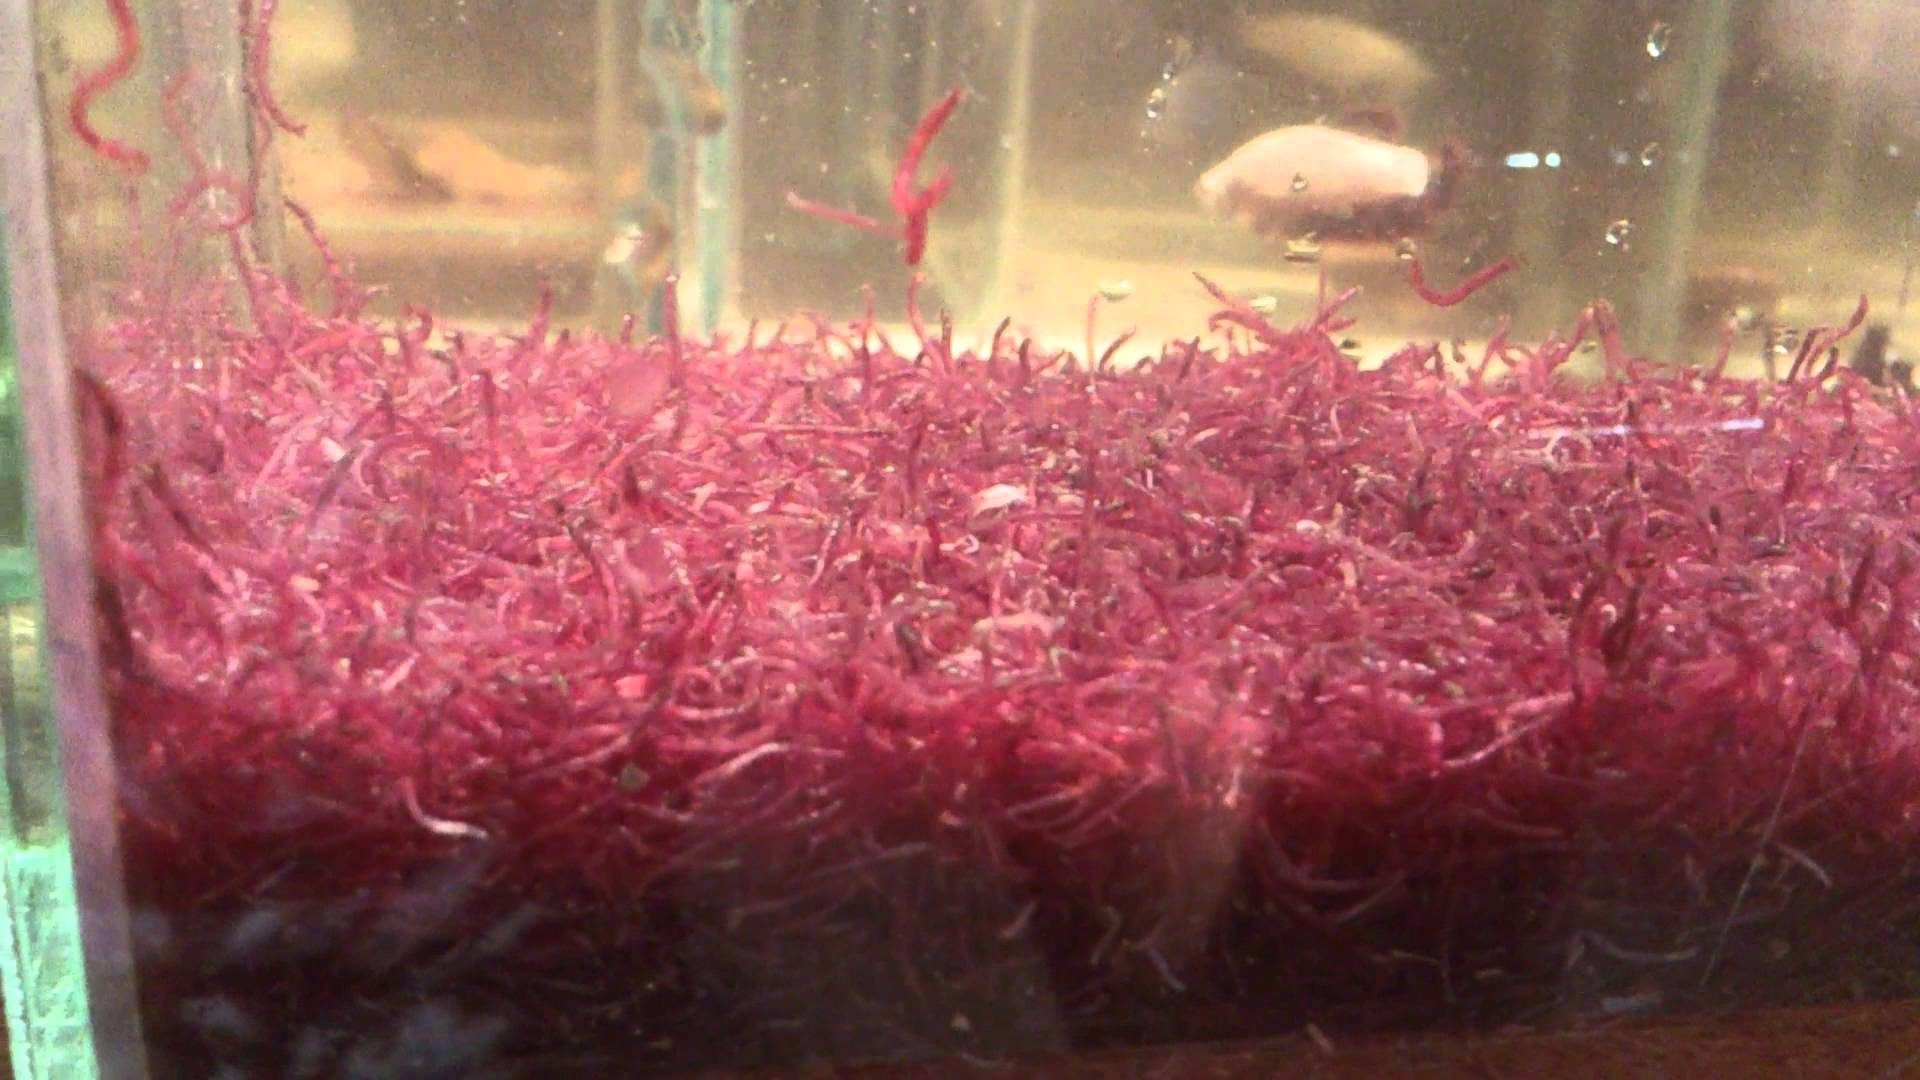 blood-worms-for-tropical-fish-bloodworms-culture-breeding-for-sale-aquaticmag-6-2821364